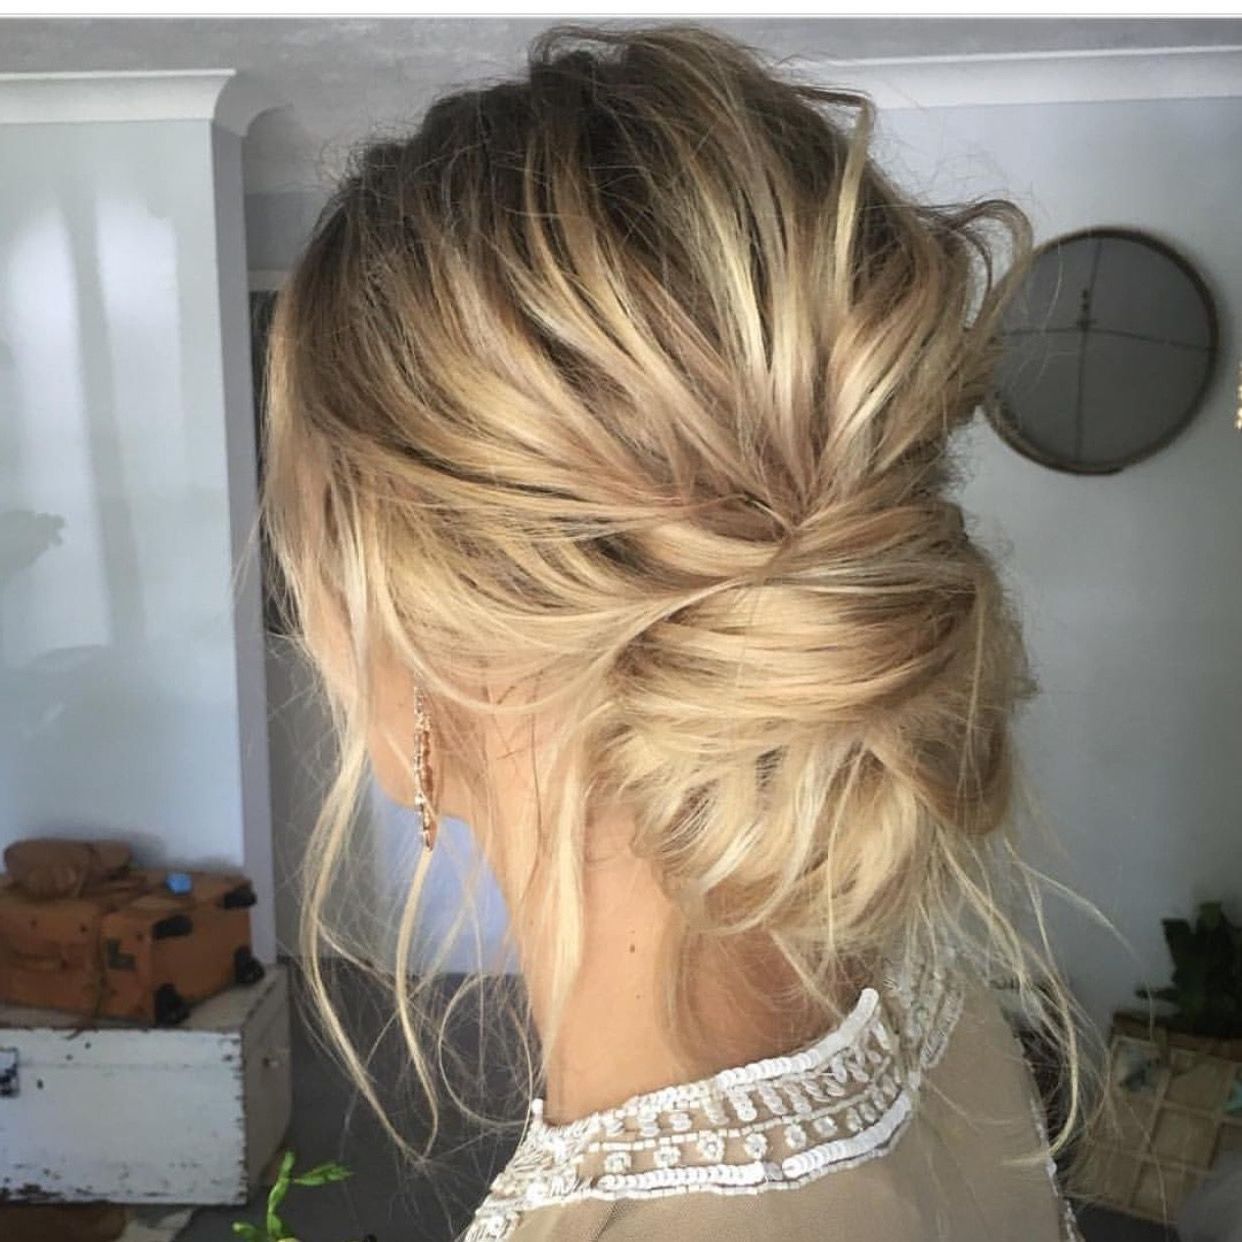 Best And Newest Casual Bun With Highlights Regarding This Low Twisted Bun Is What Textured Hair Dreams Are Made Of! We (View 14 of 15)